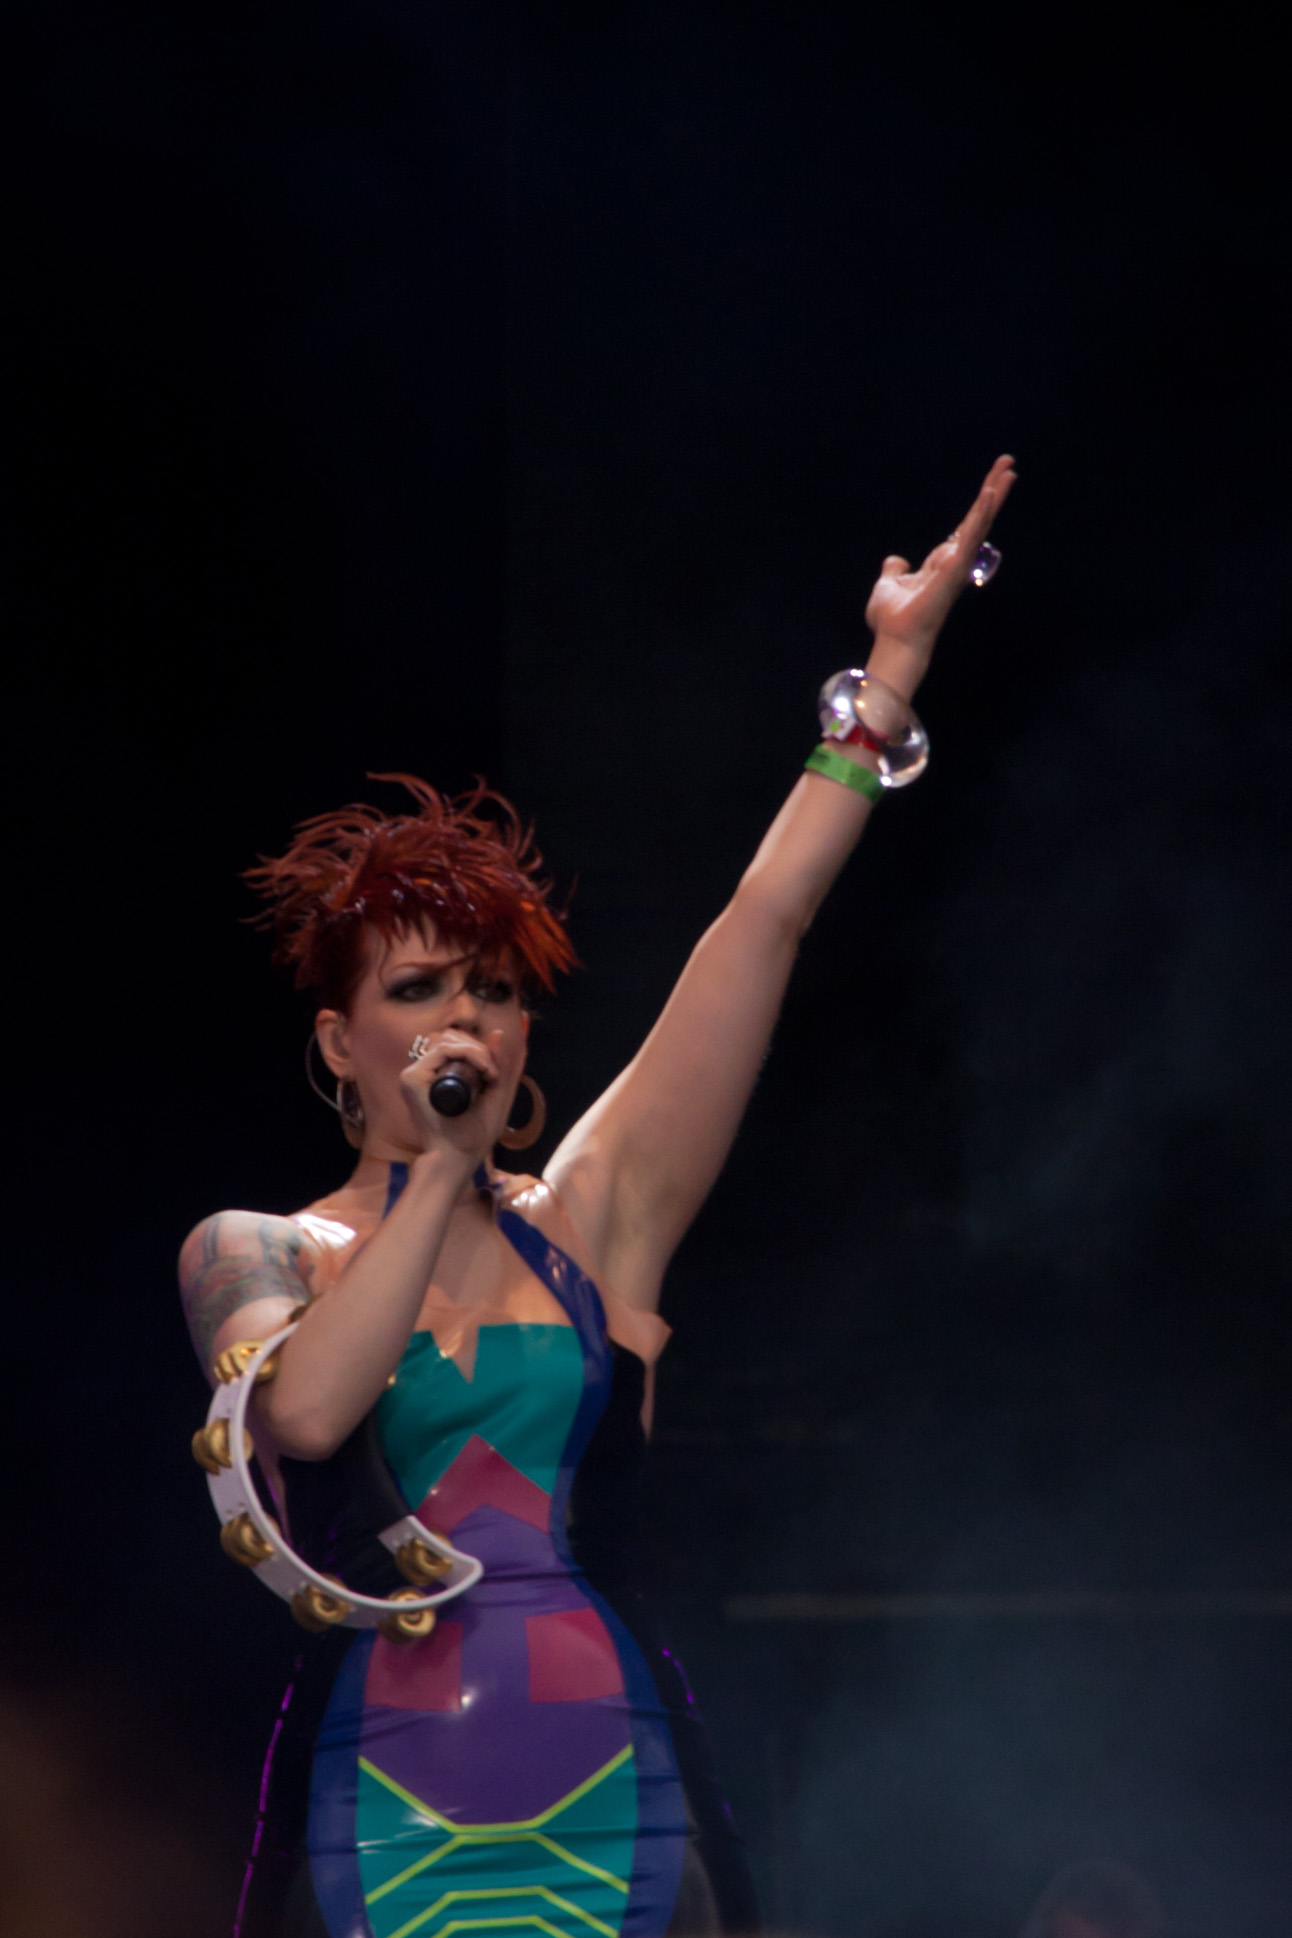 a woman in colorful dress holding a microphone